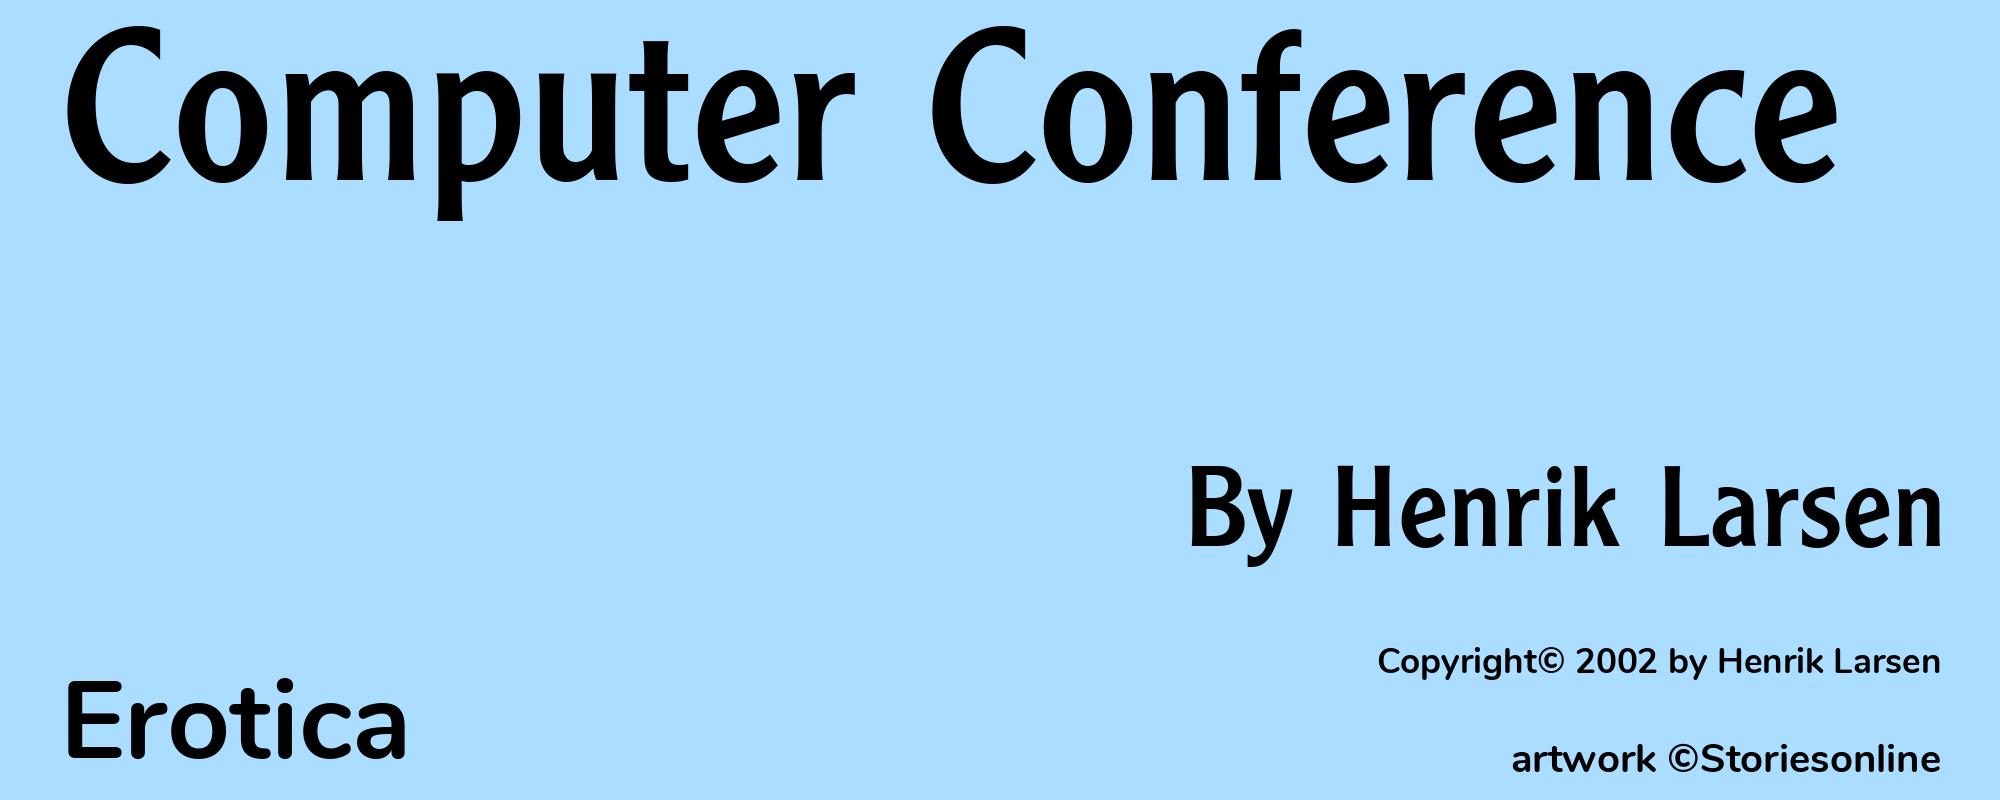 Computer Conference - Cover